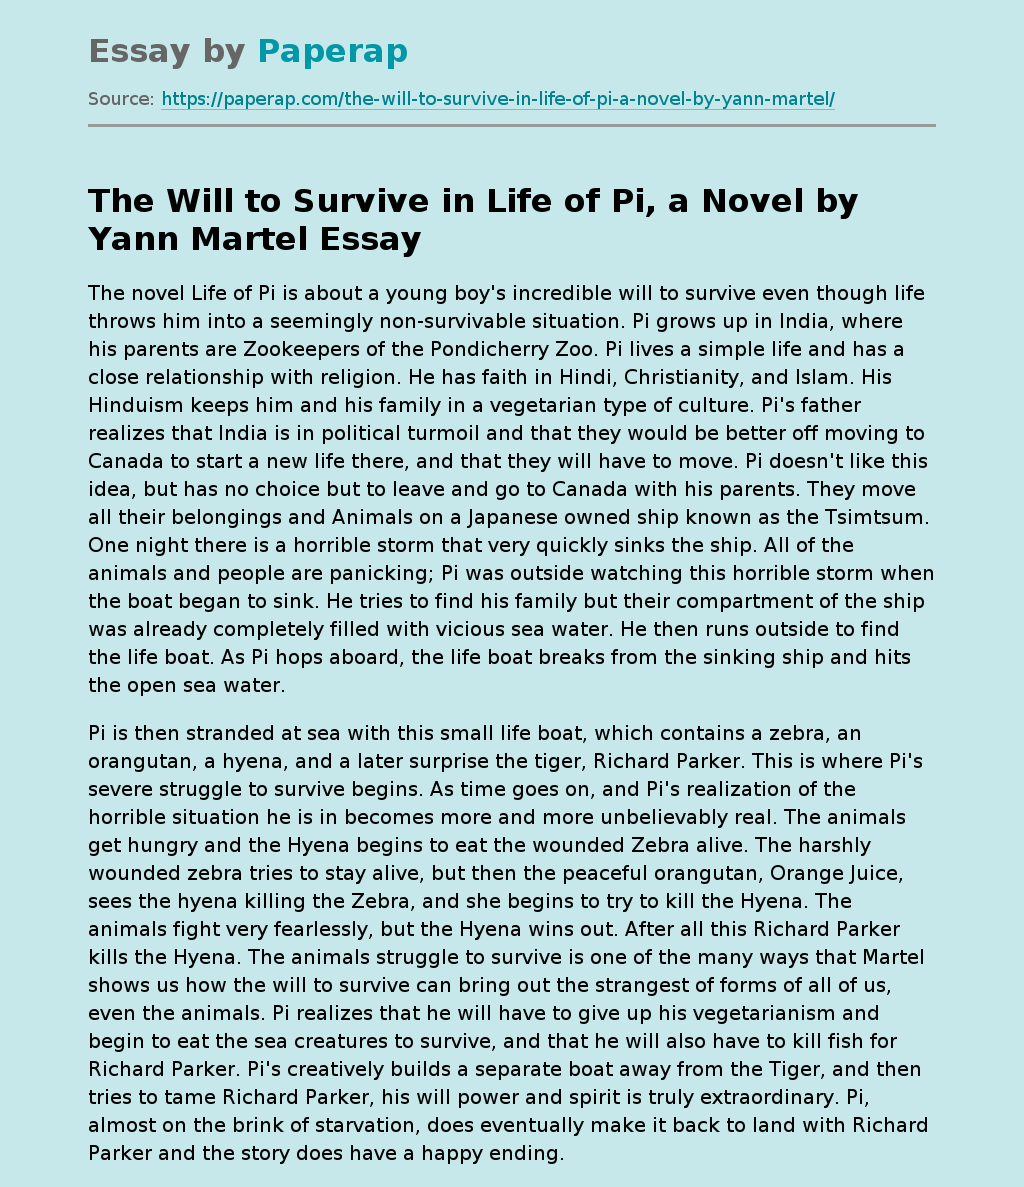 The Will to Survive in Life of Pi, a Novel by Yann Martel